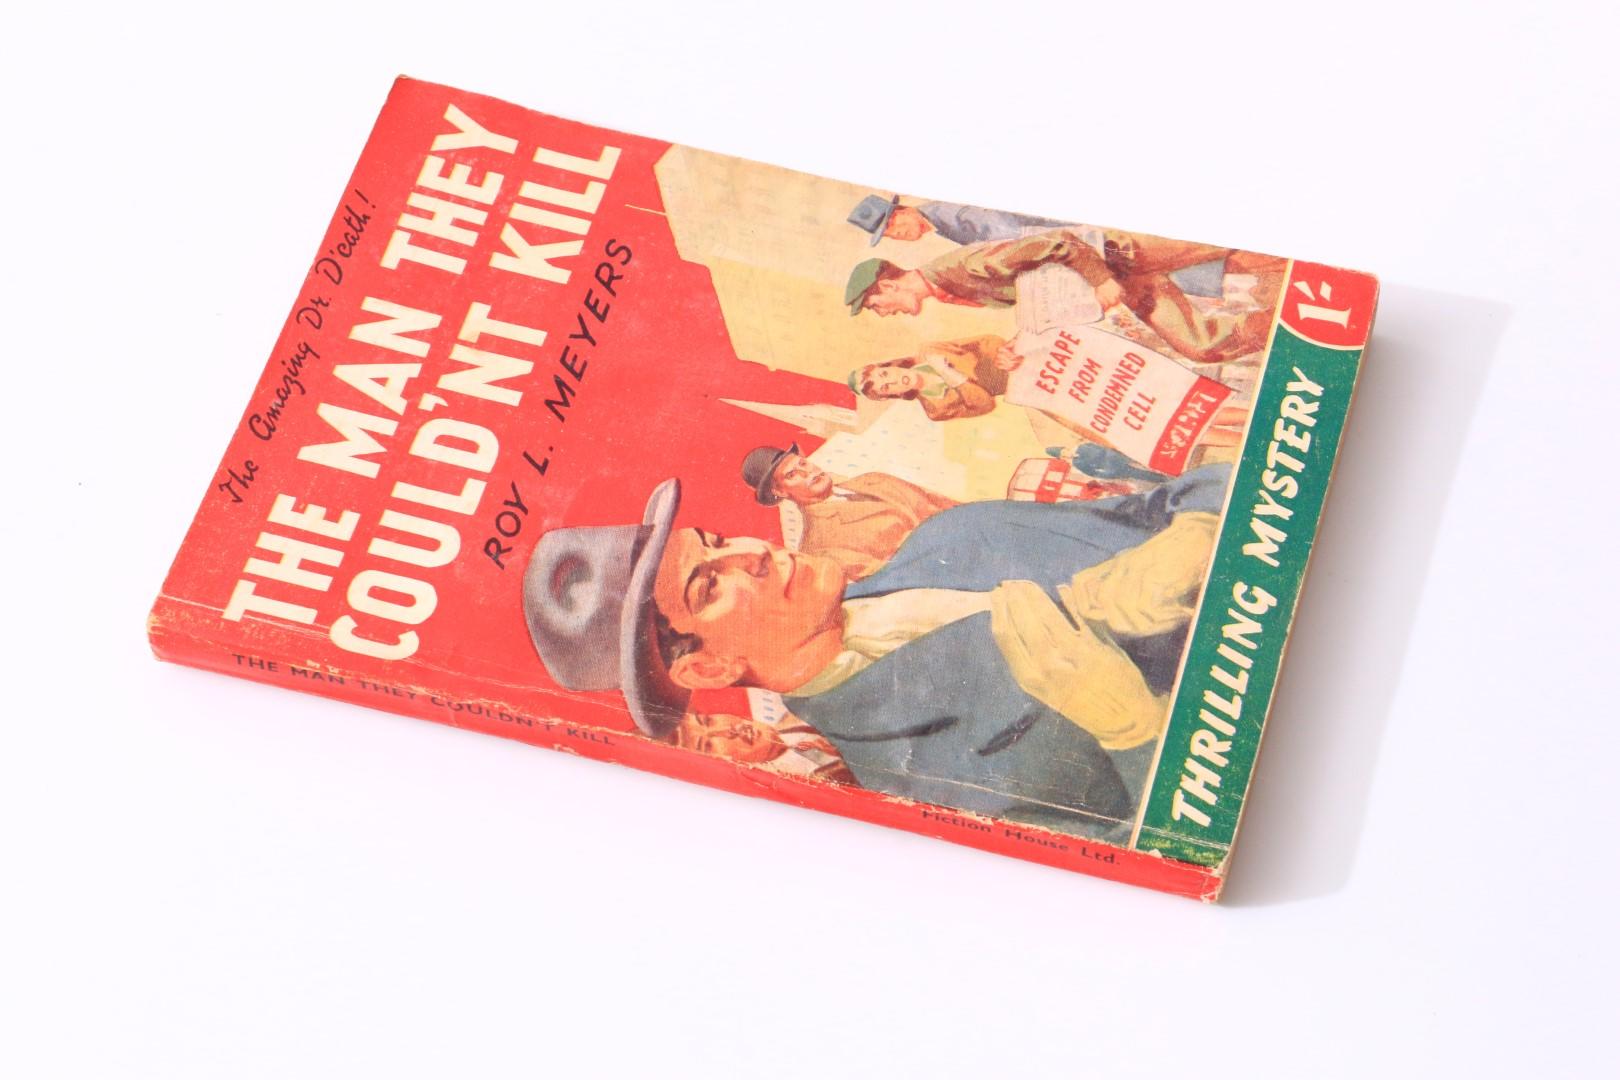 Roy L. Meyers - The Man They Couldn't Kill - Fiction House Ltd, 1944, First Edition.